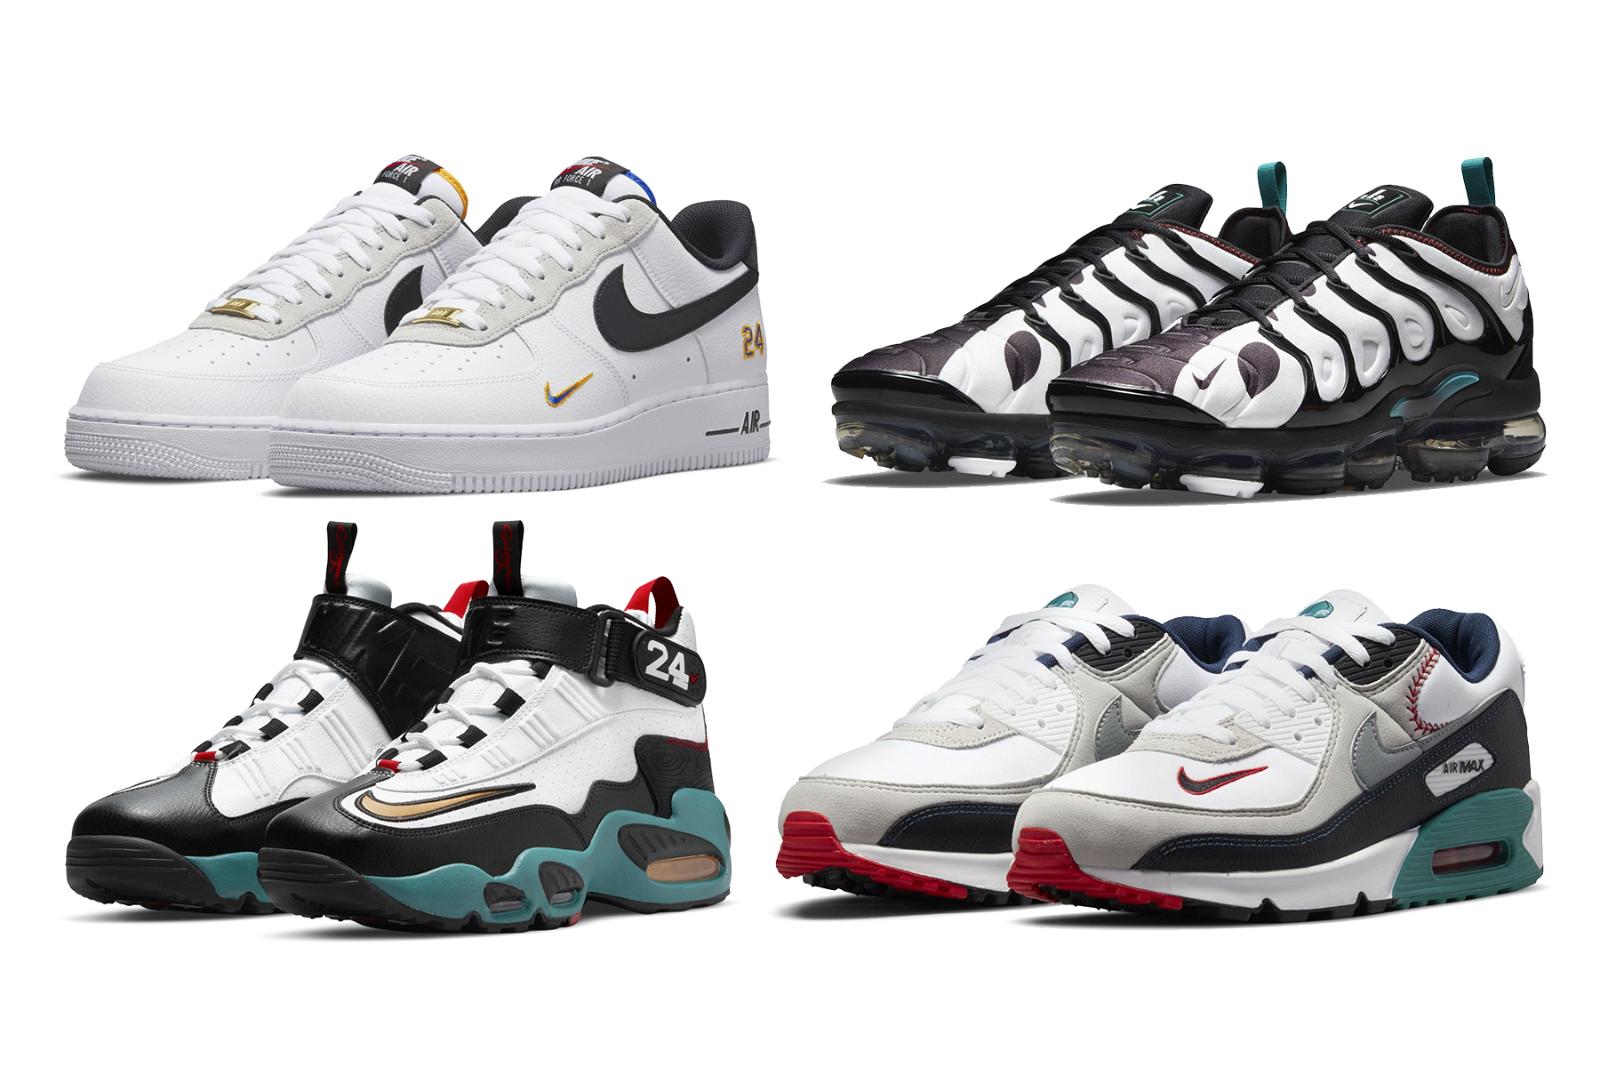 Nike x Sweetest Swing collection